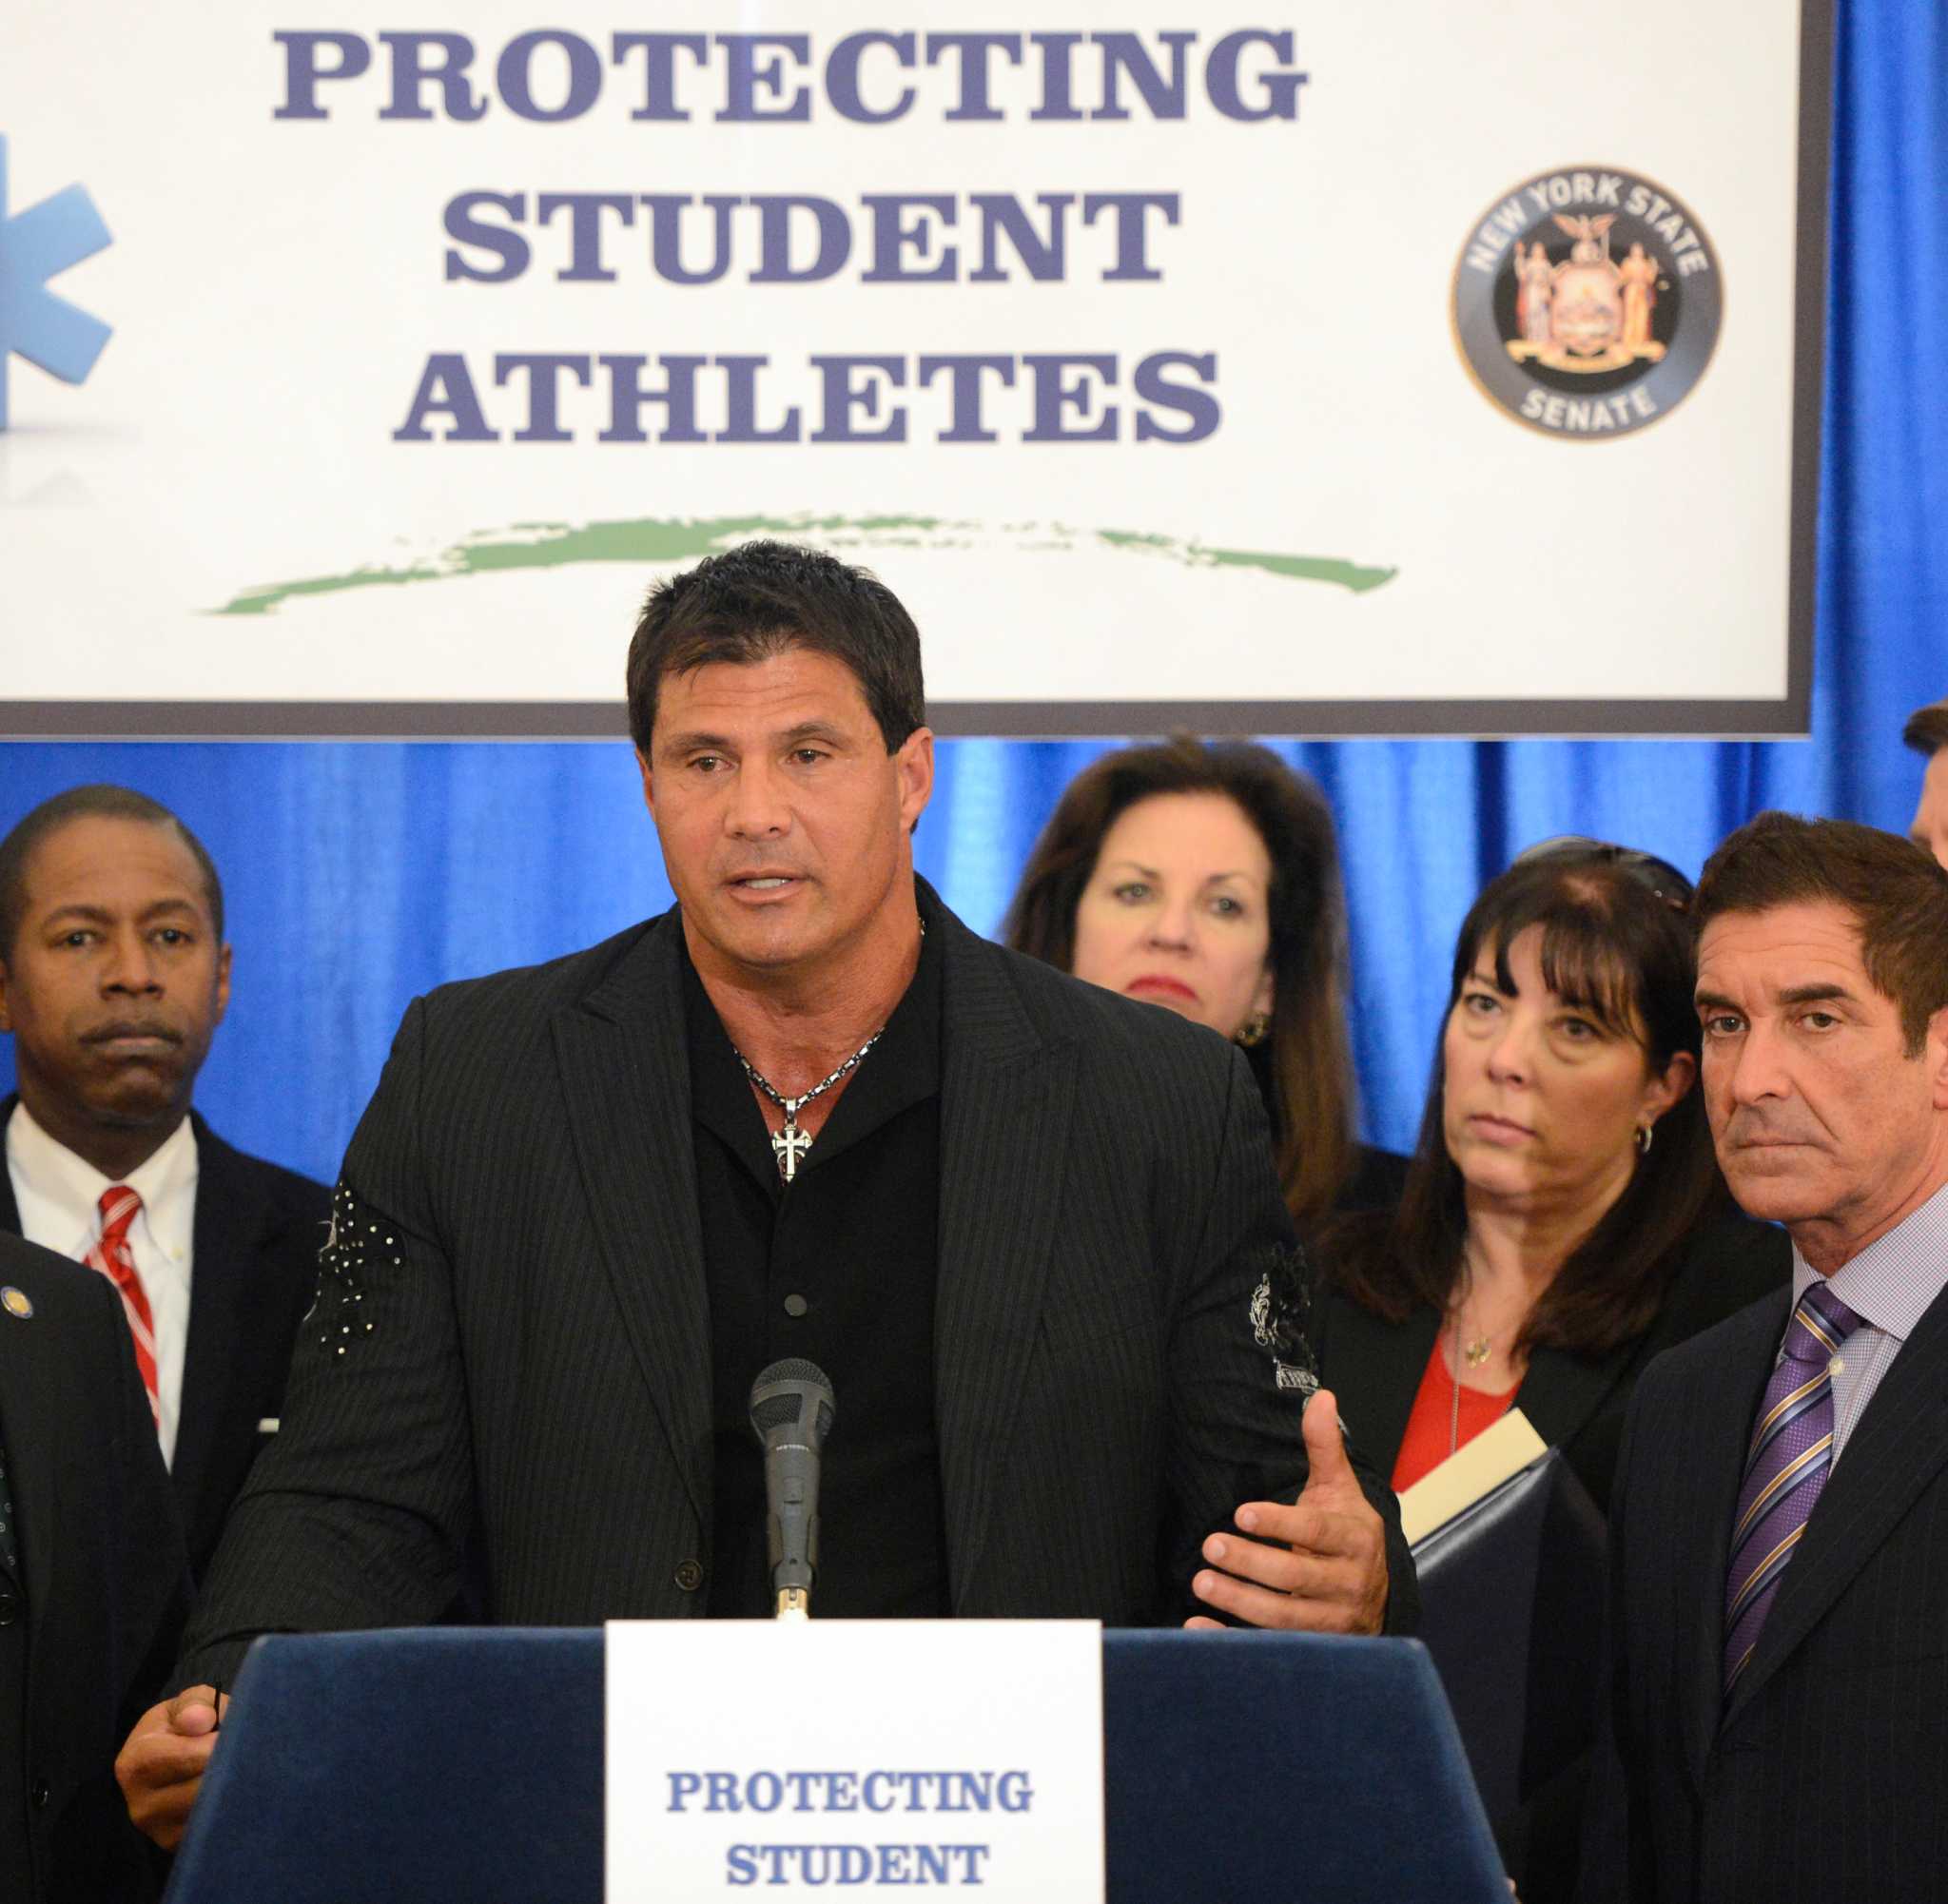 MAJOR LEAGUE BASEBALL: Former Steroids User Jose Canseco Says